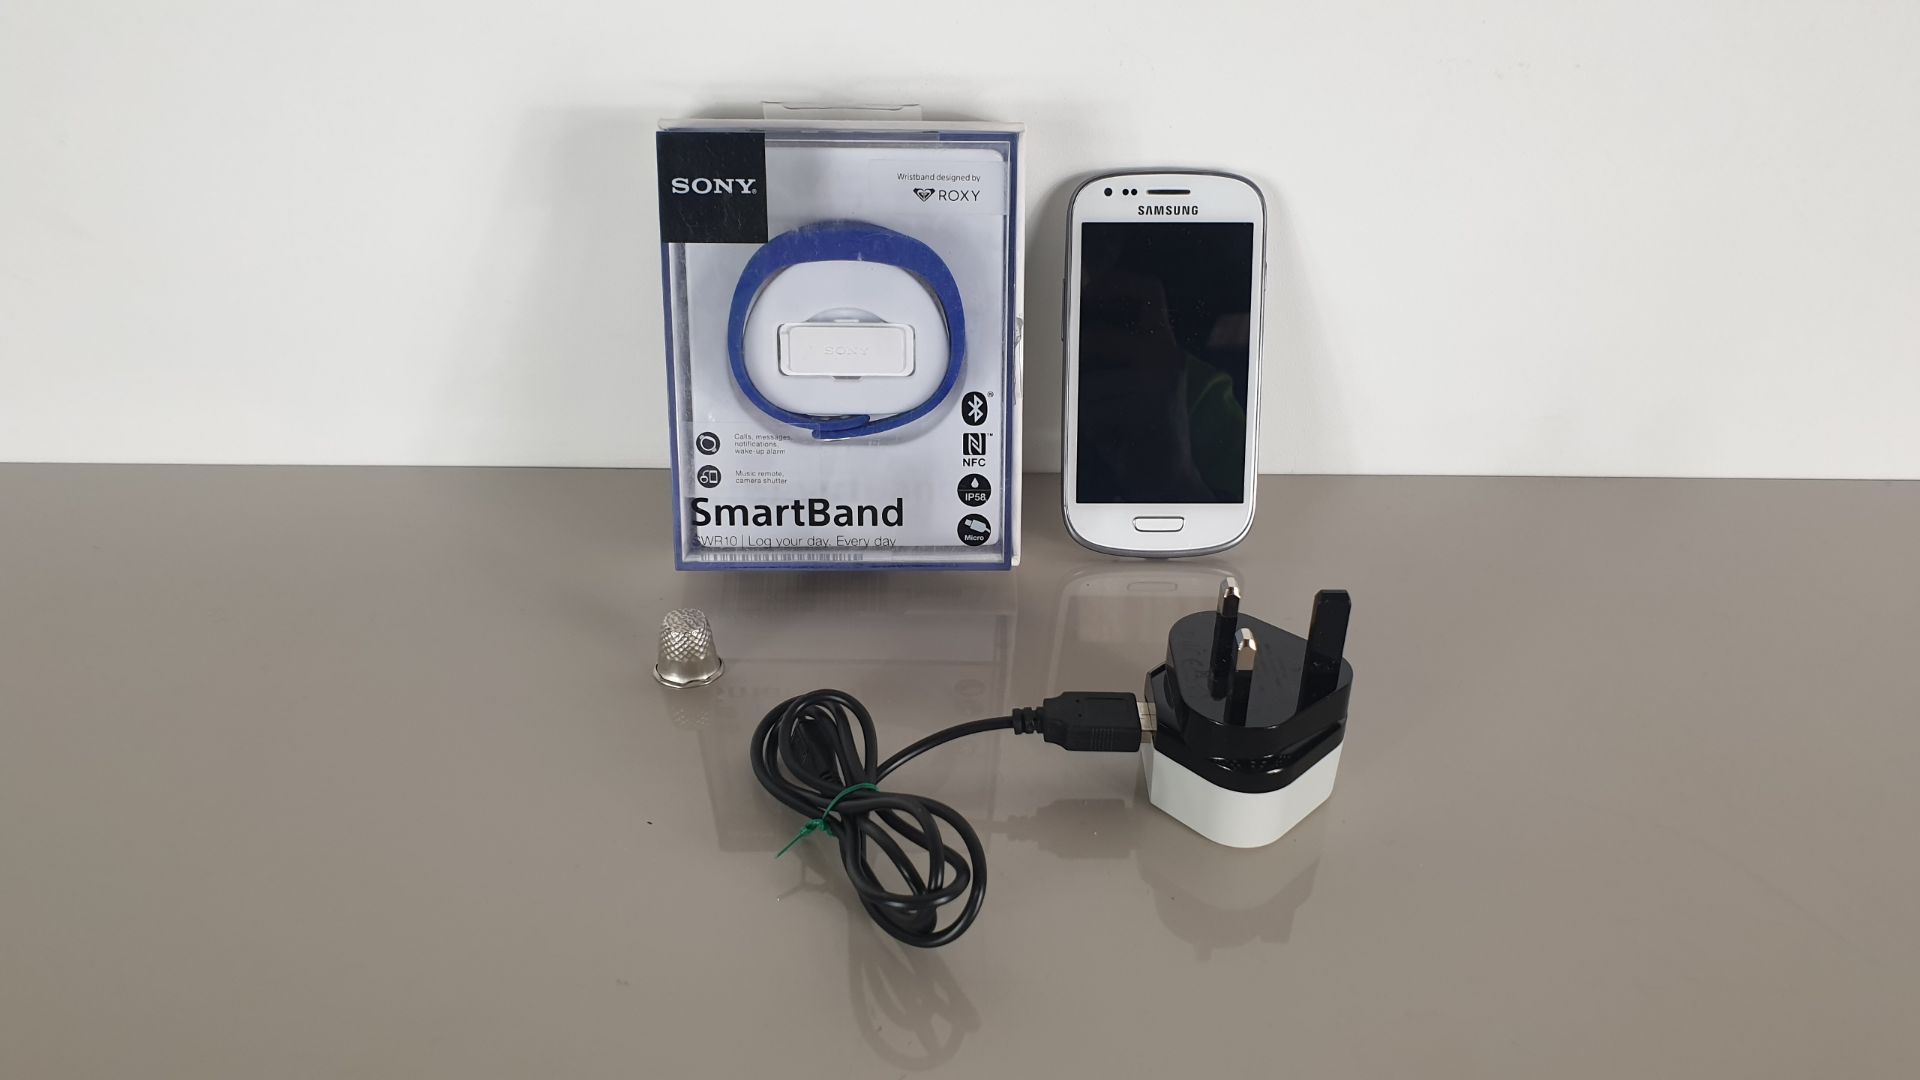 (LOT FOR THURSDAY 28TH MAY AUCTION) SAMSUNG S3 MINI SMART PHONE WITH CHARGER PLUS A SONY SMARTBAND